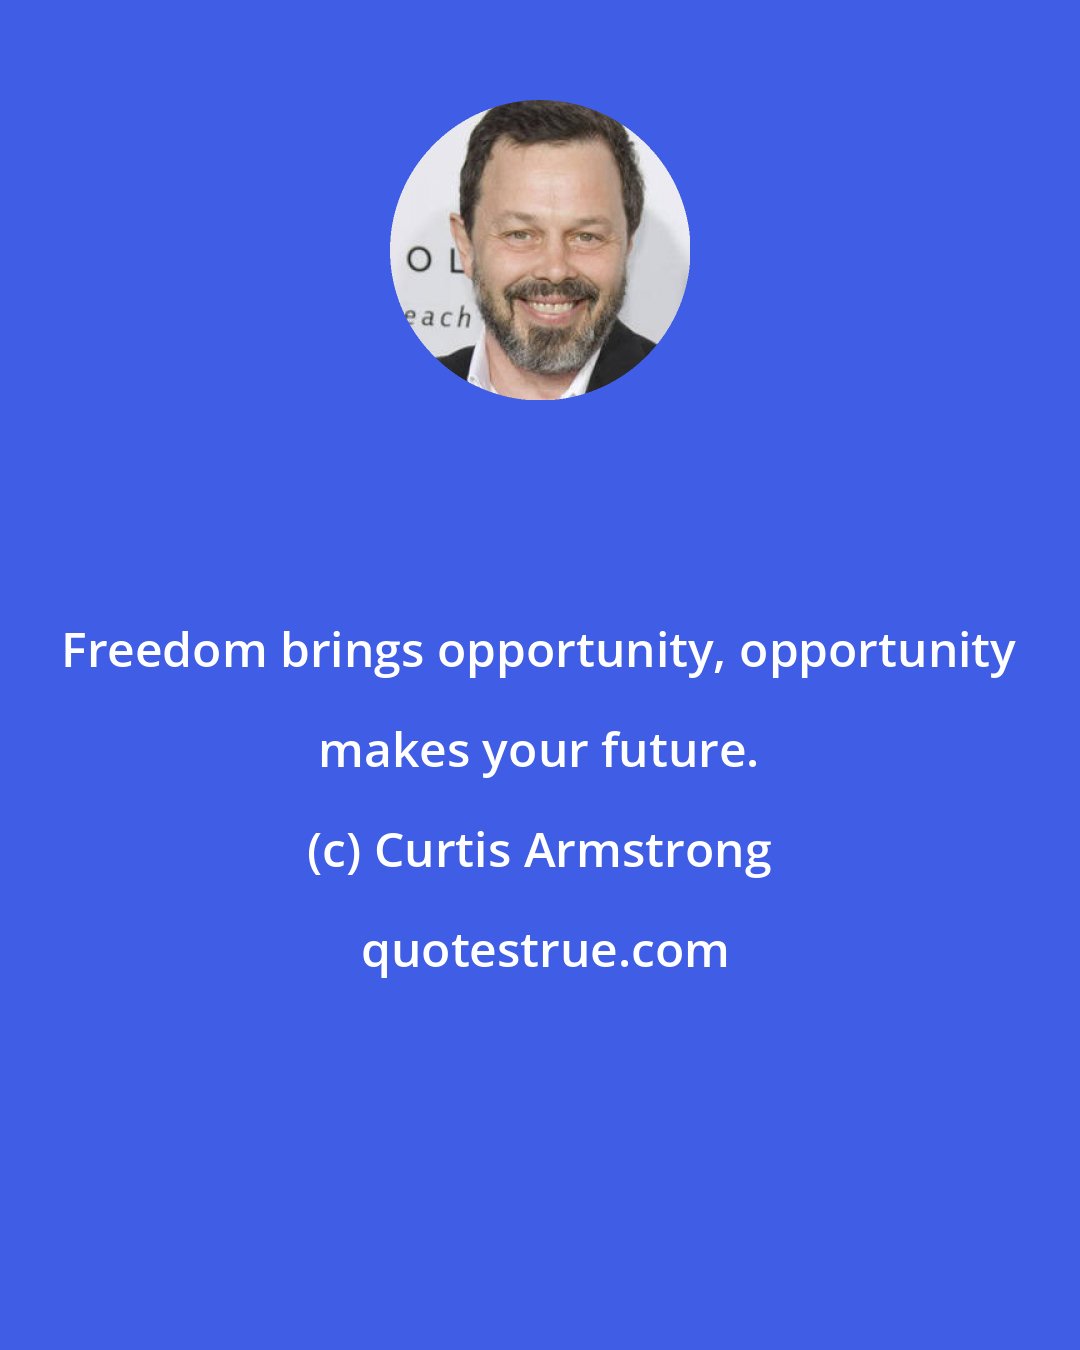 Curtis Armstrong: Freedom brings opportunity, opportunity makes your future.